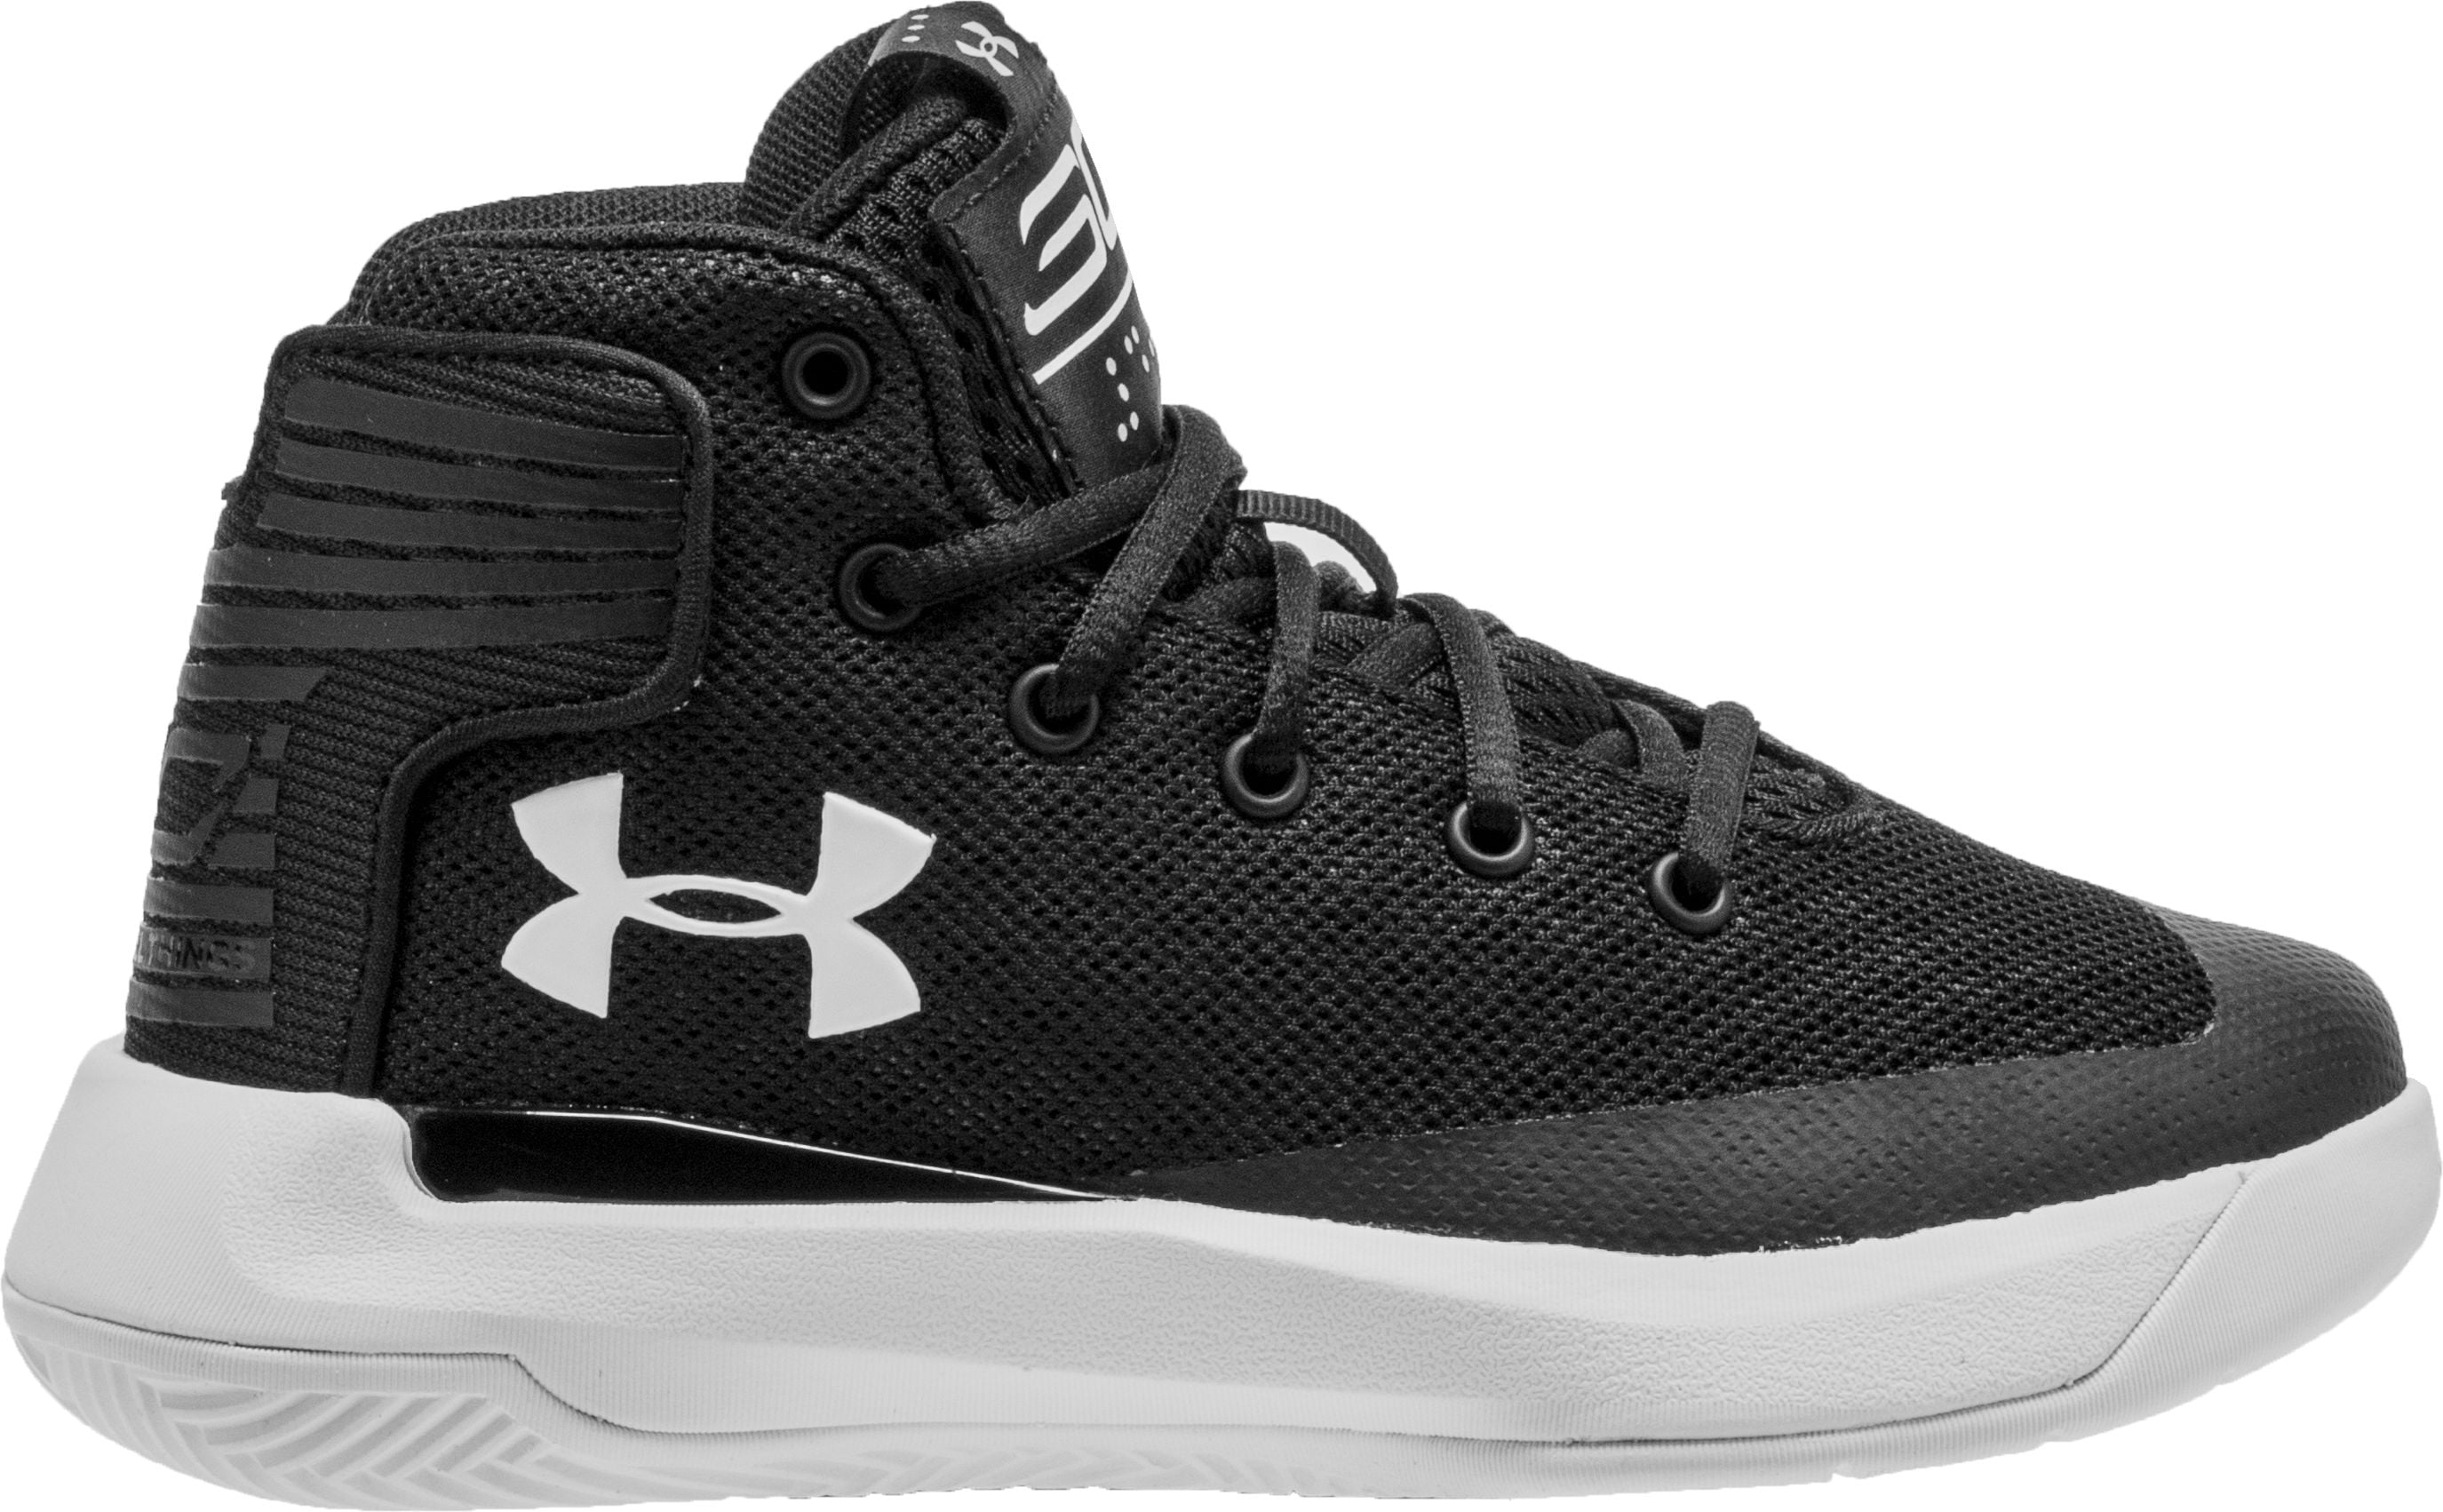 Stephen Curry Shoes Under Armour For Kids